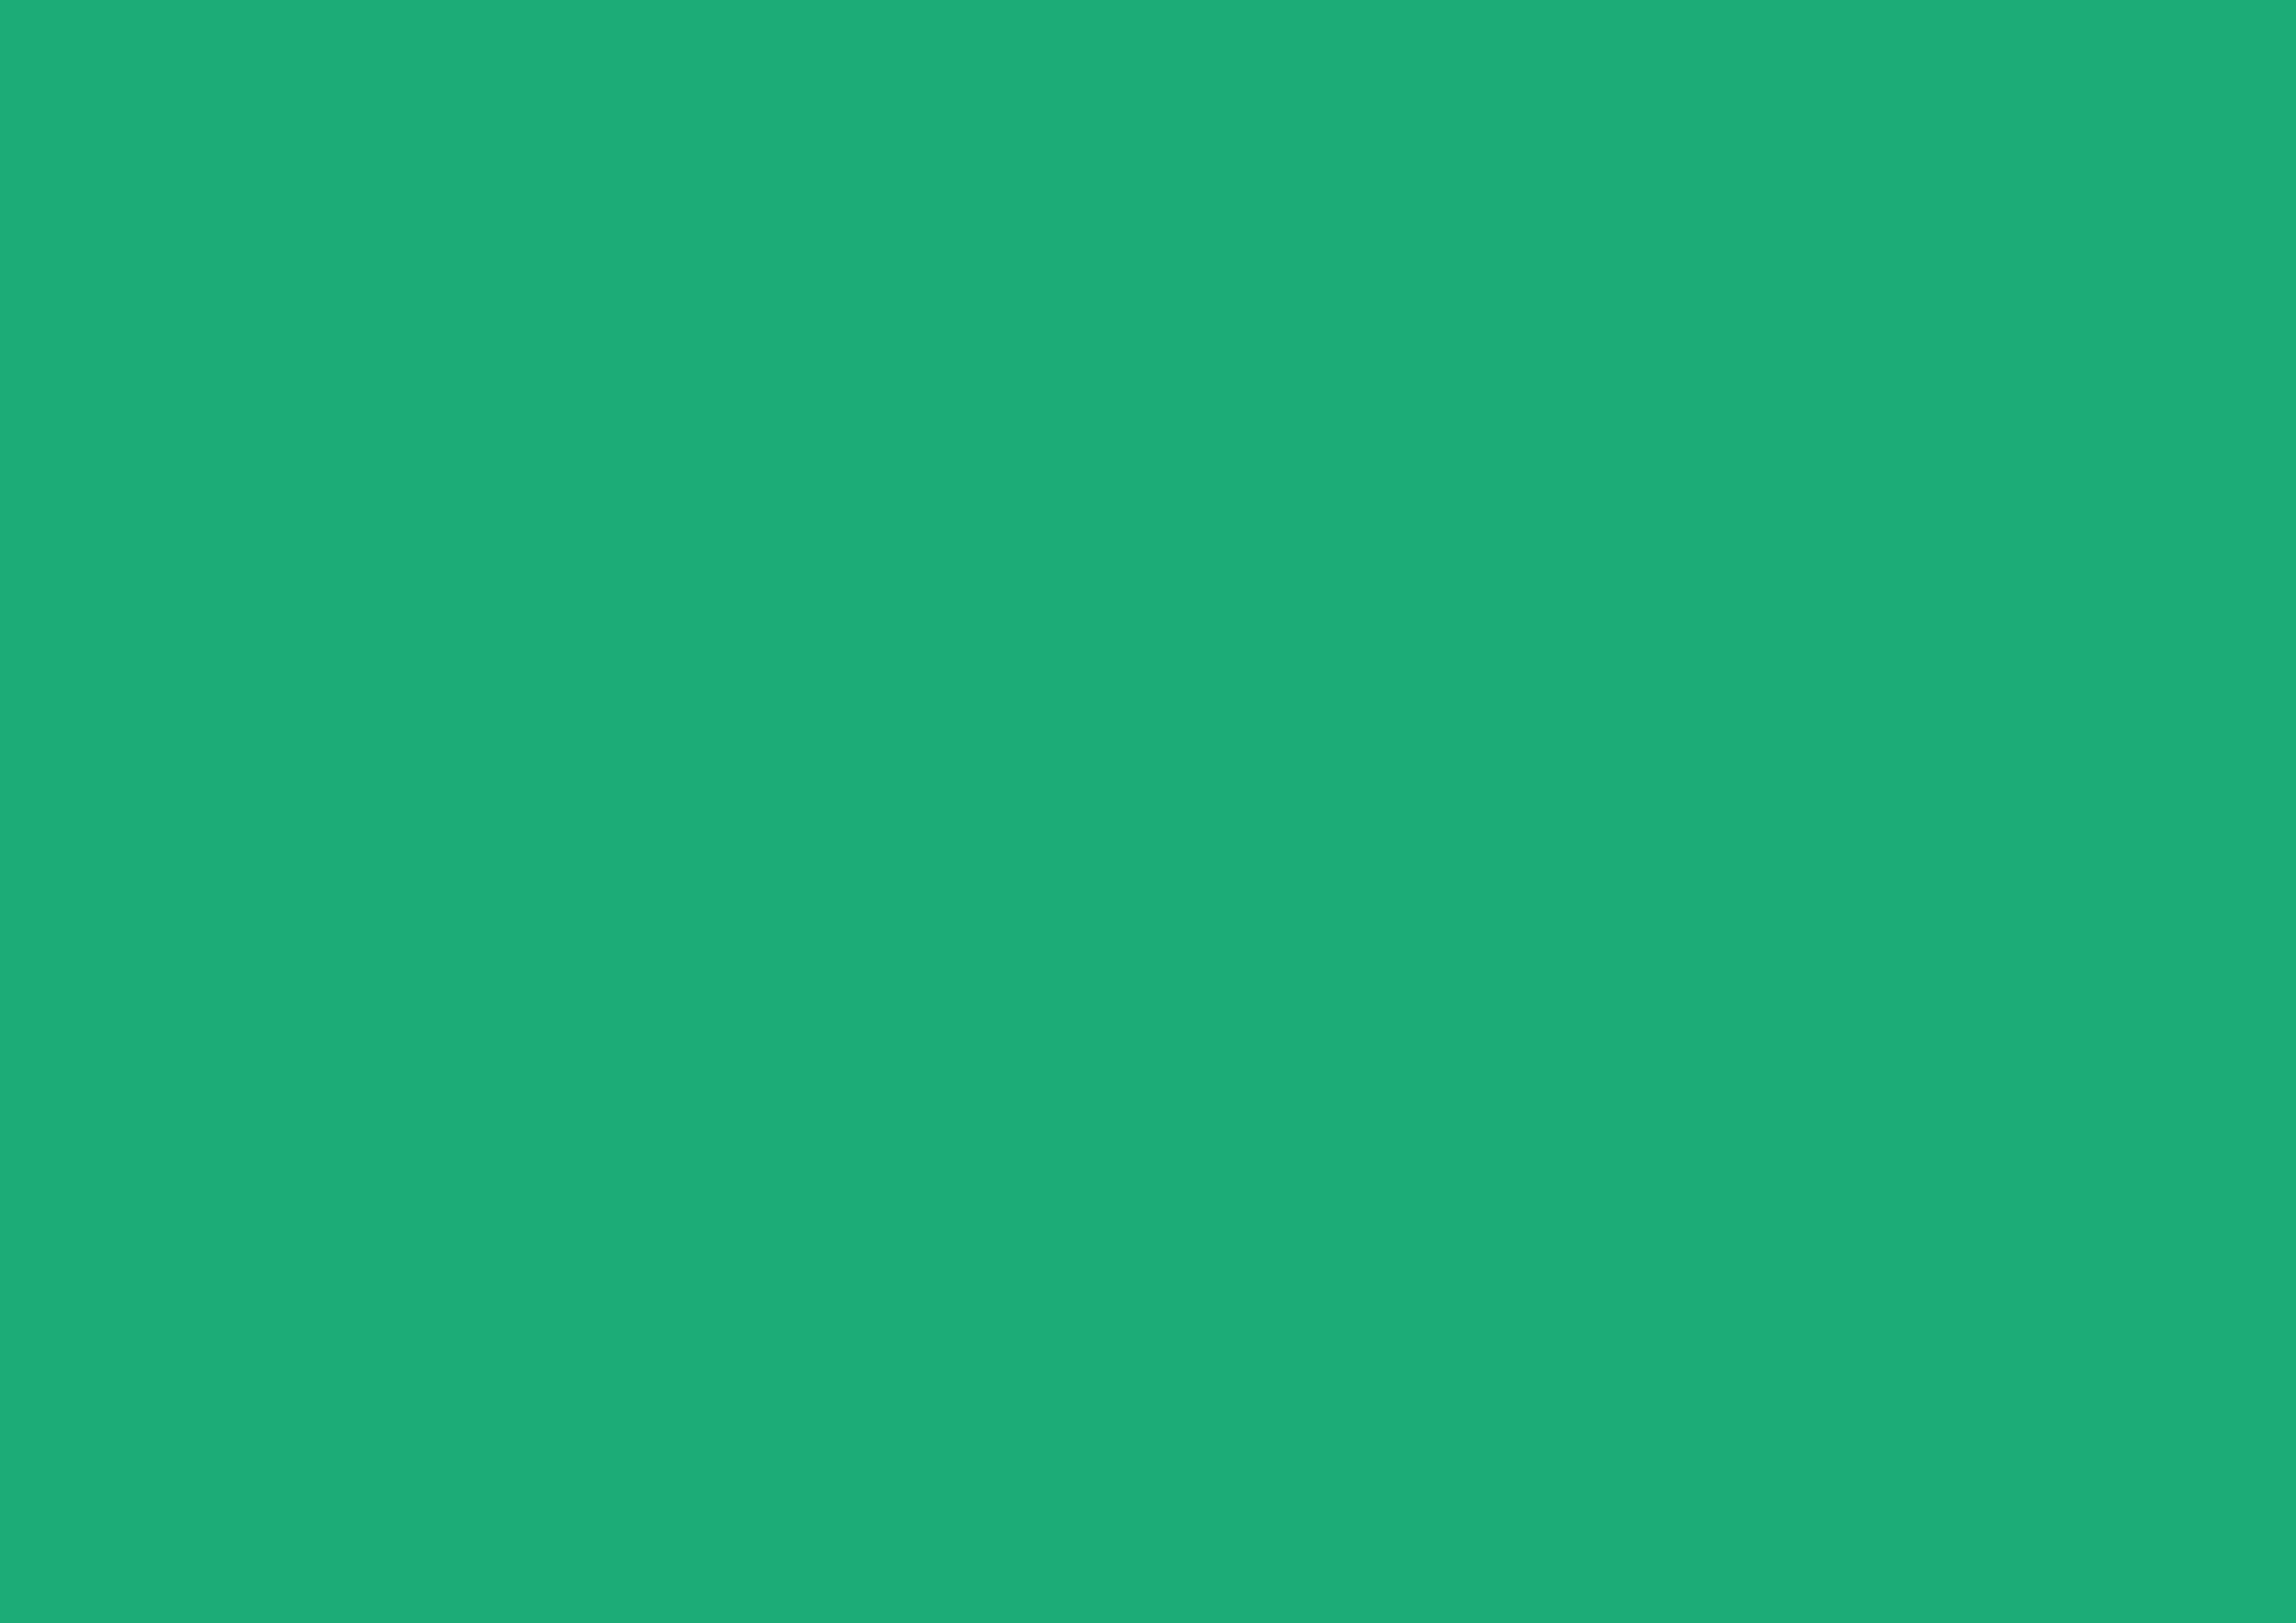 3508x2480 Green Crayola Solid Color Background